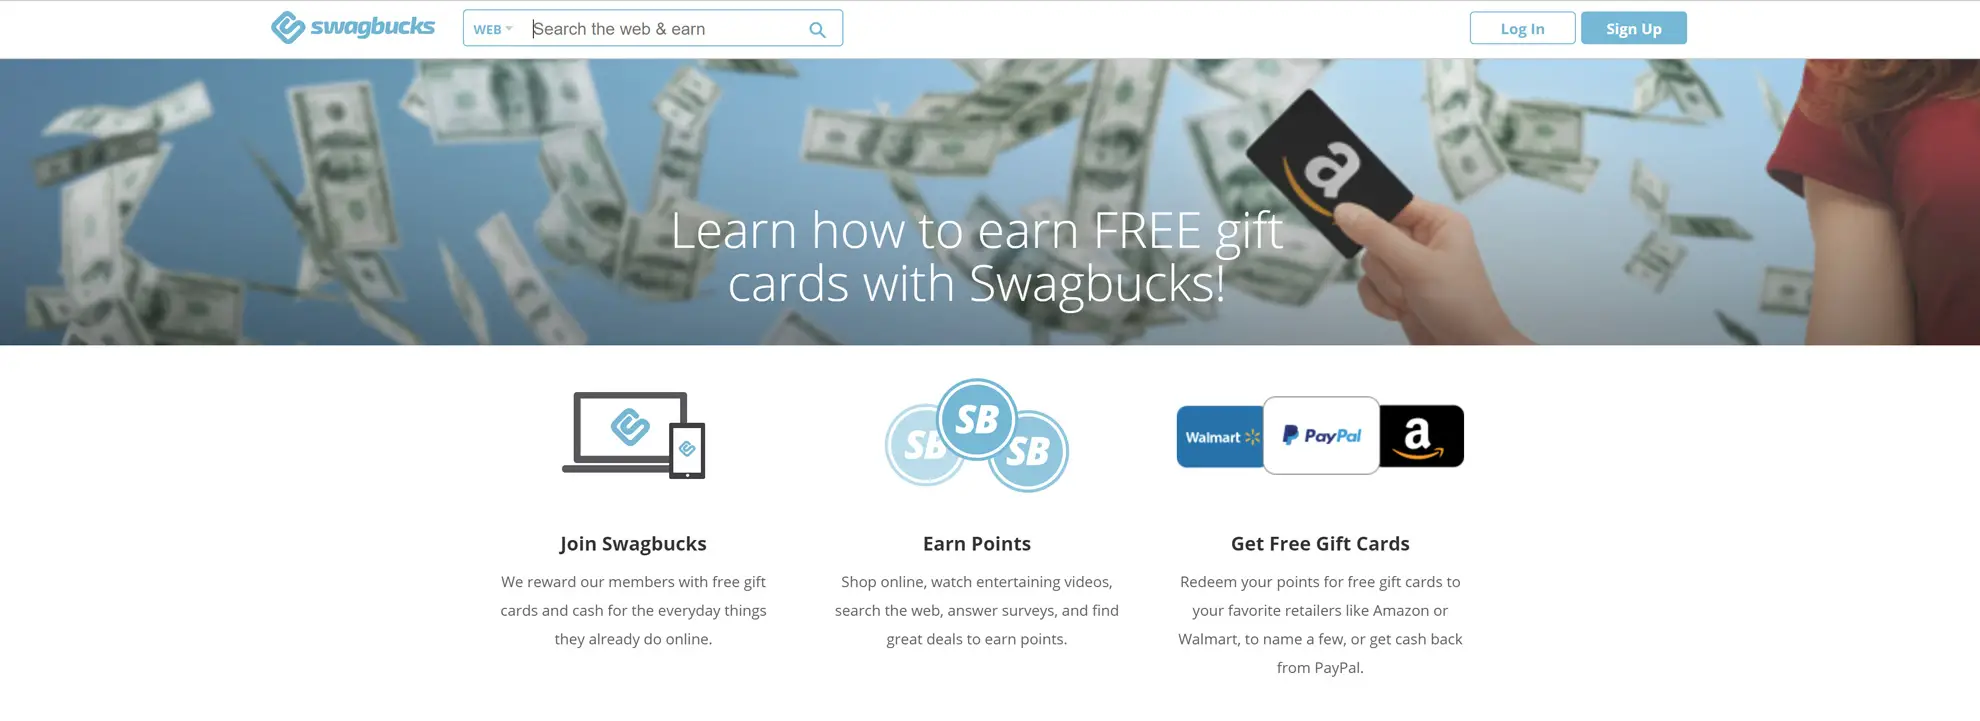 Swagbucks Review: The Ultimate Guide To Making Money With Swagbucks.com